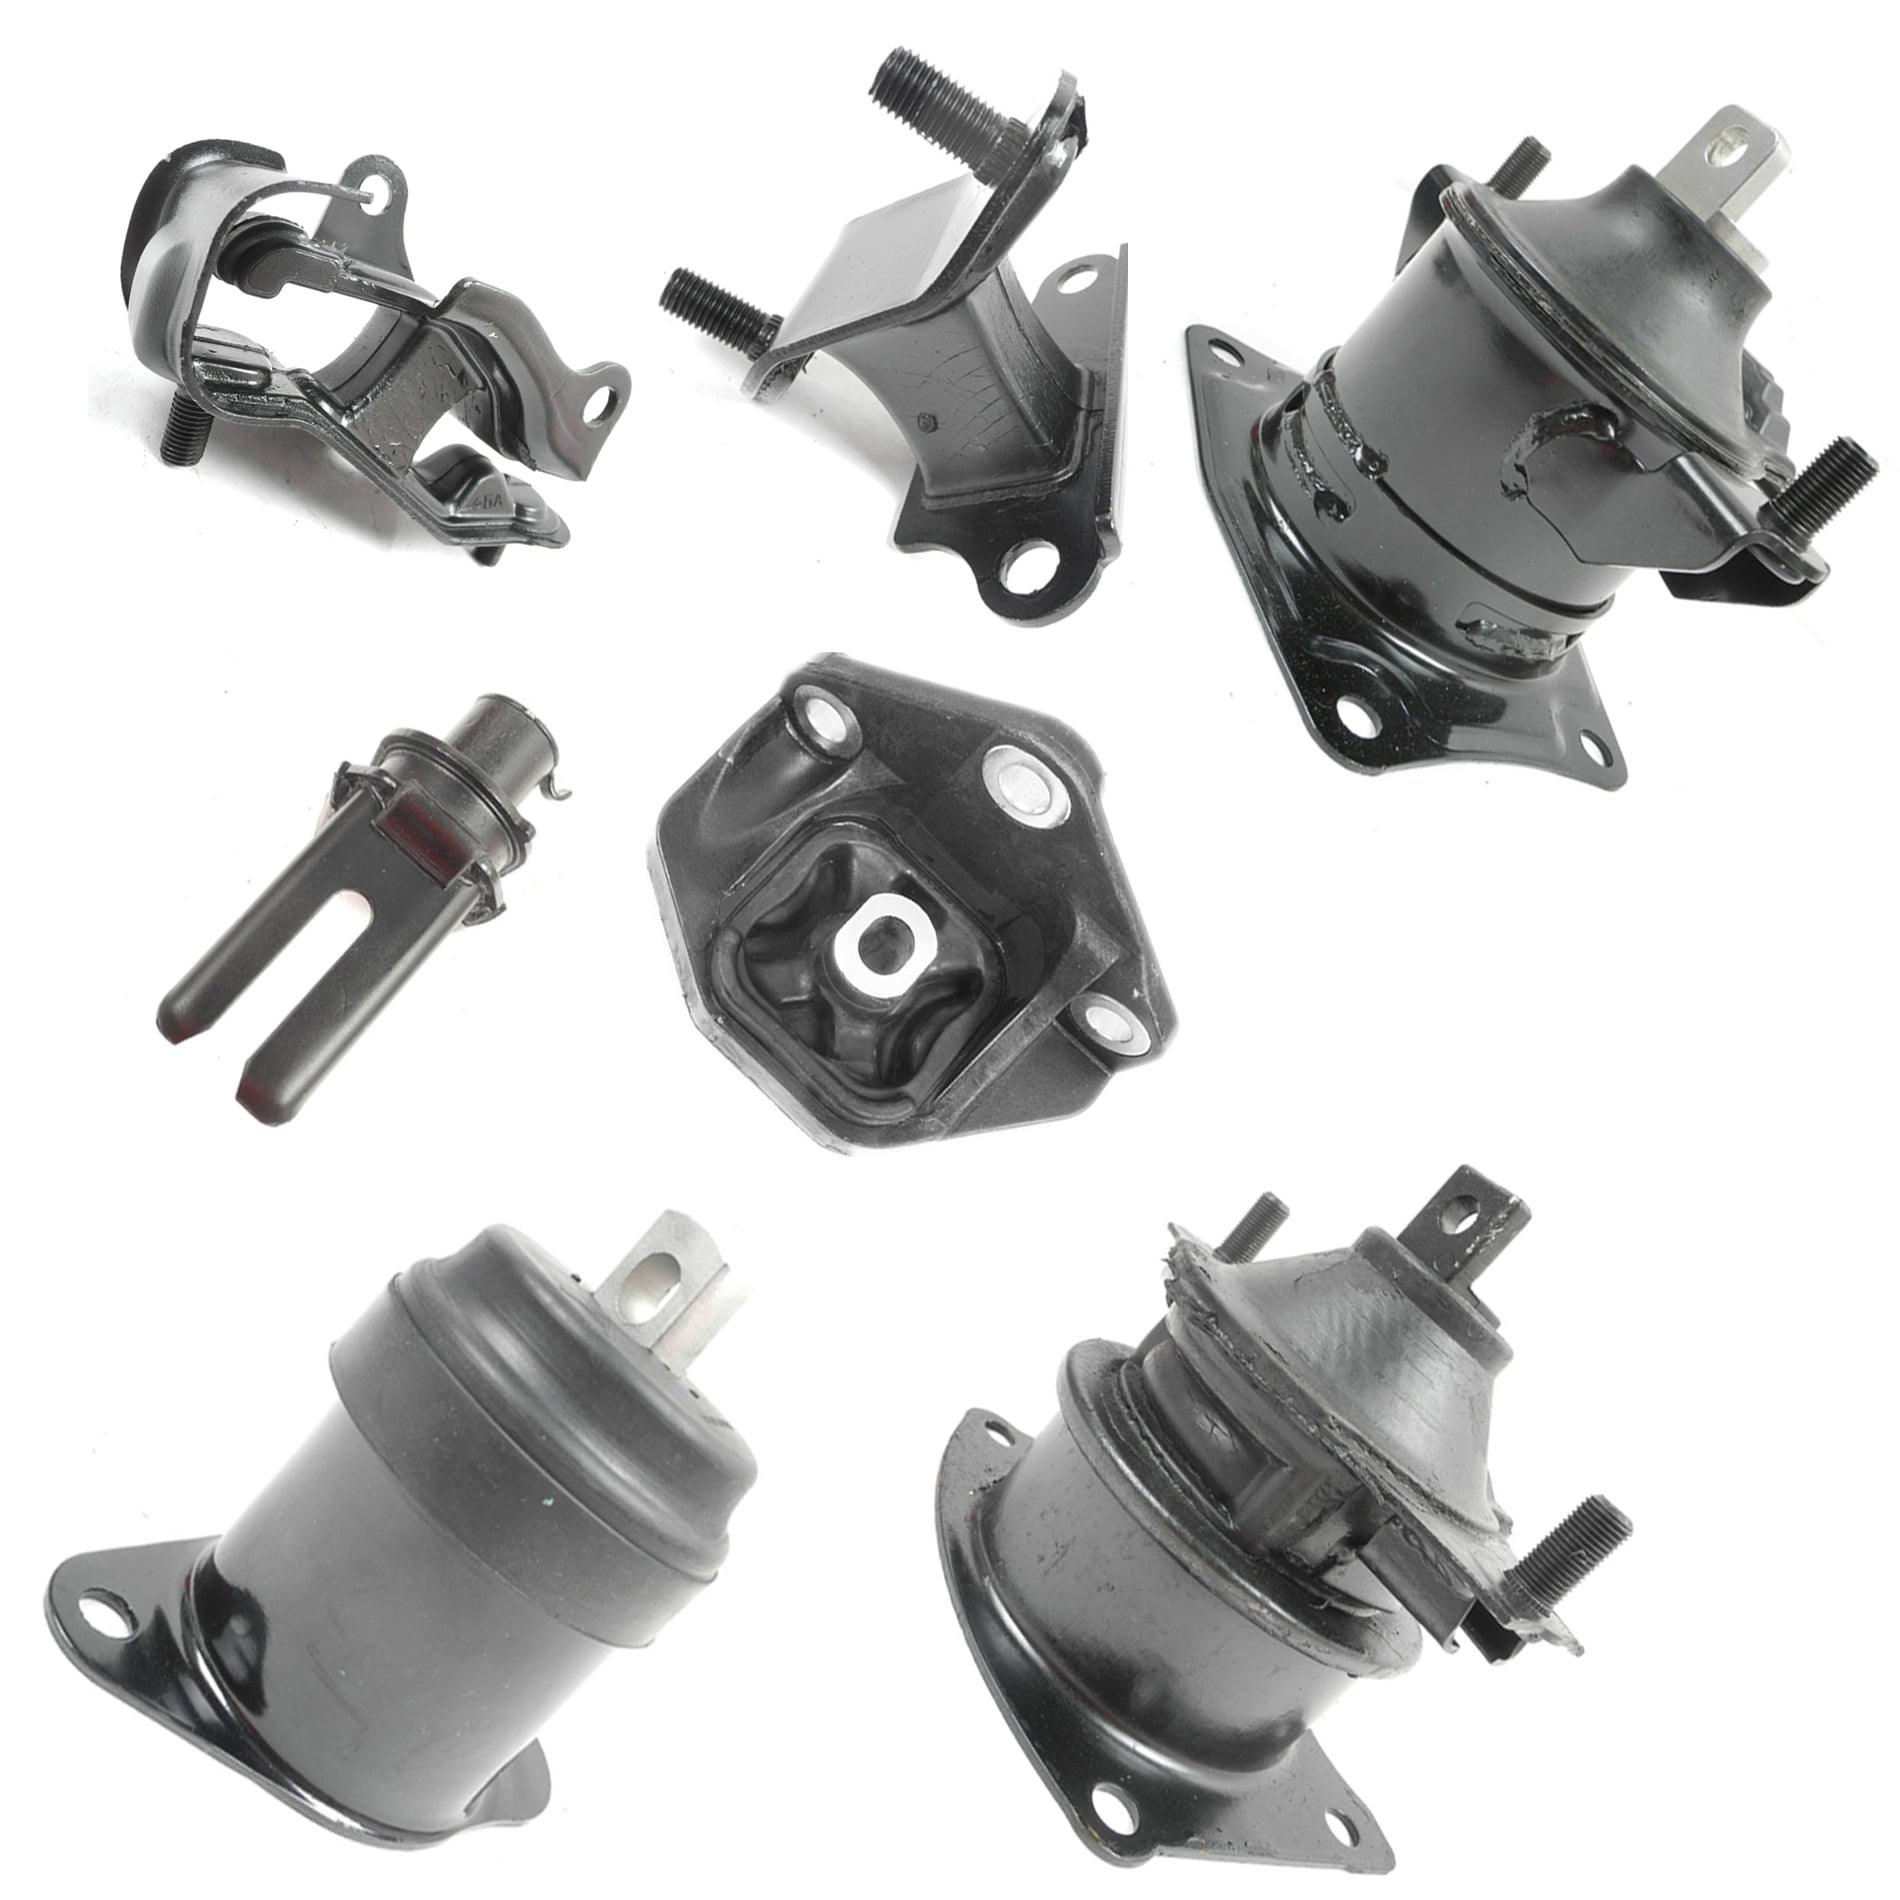 ENA Engine Motor and Trans Mount Set of 5 Compatible with 1999-2004 Honda Odyssey 3.5L Compatible with A4519HY A4518 A6552 A6582 A6579